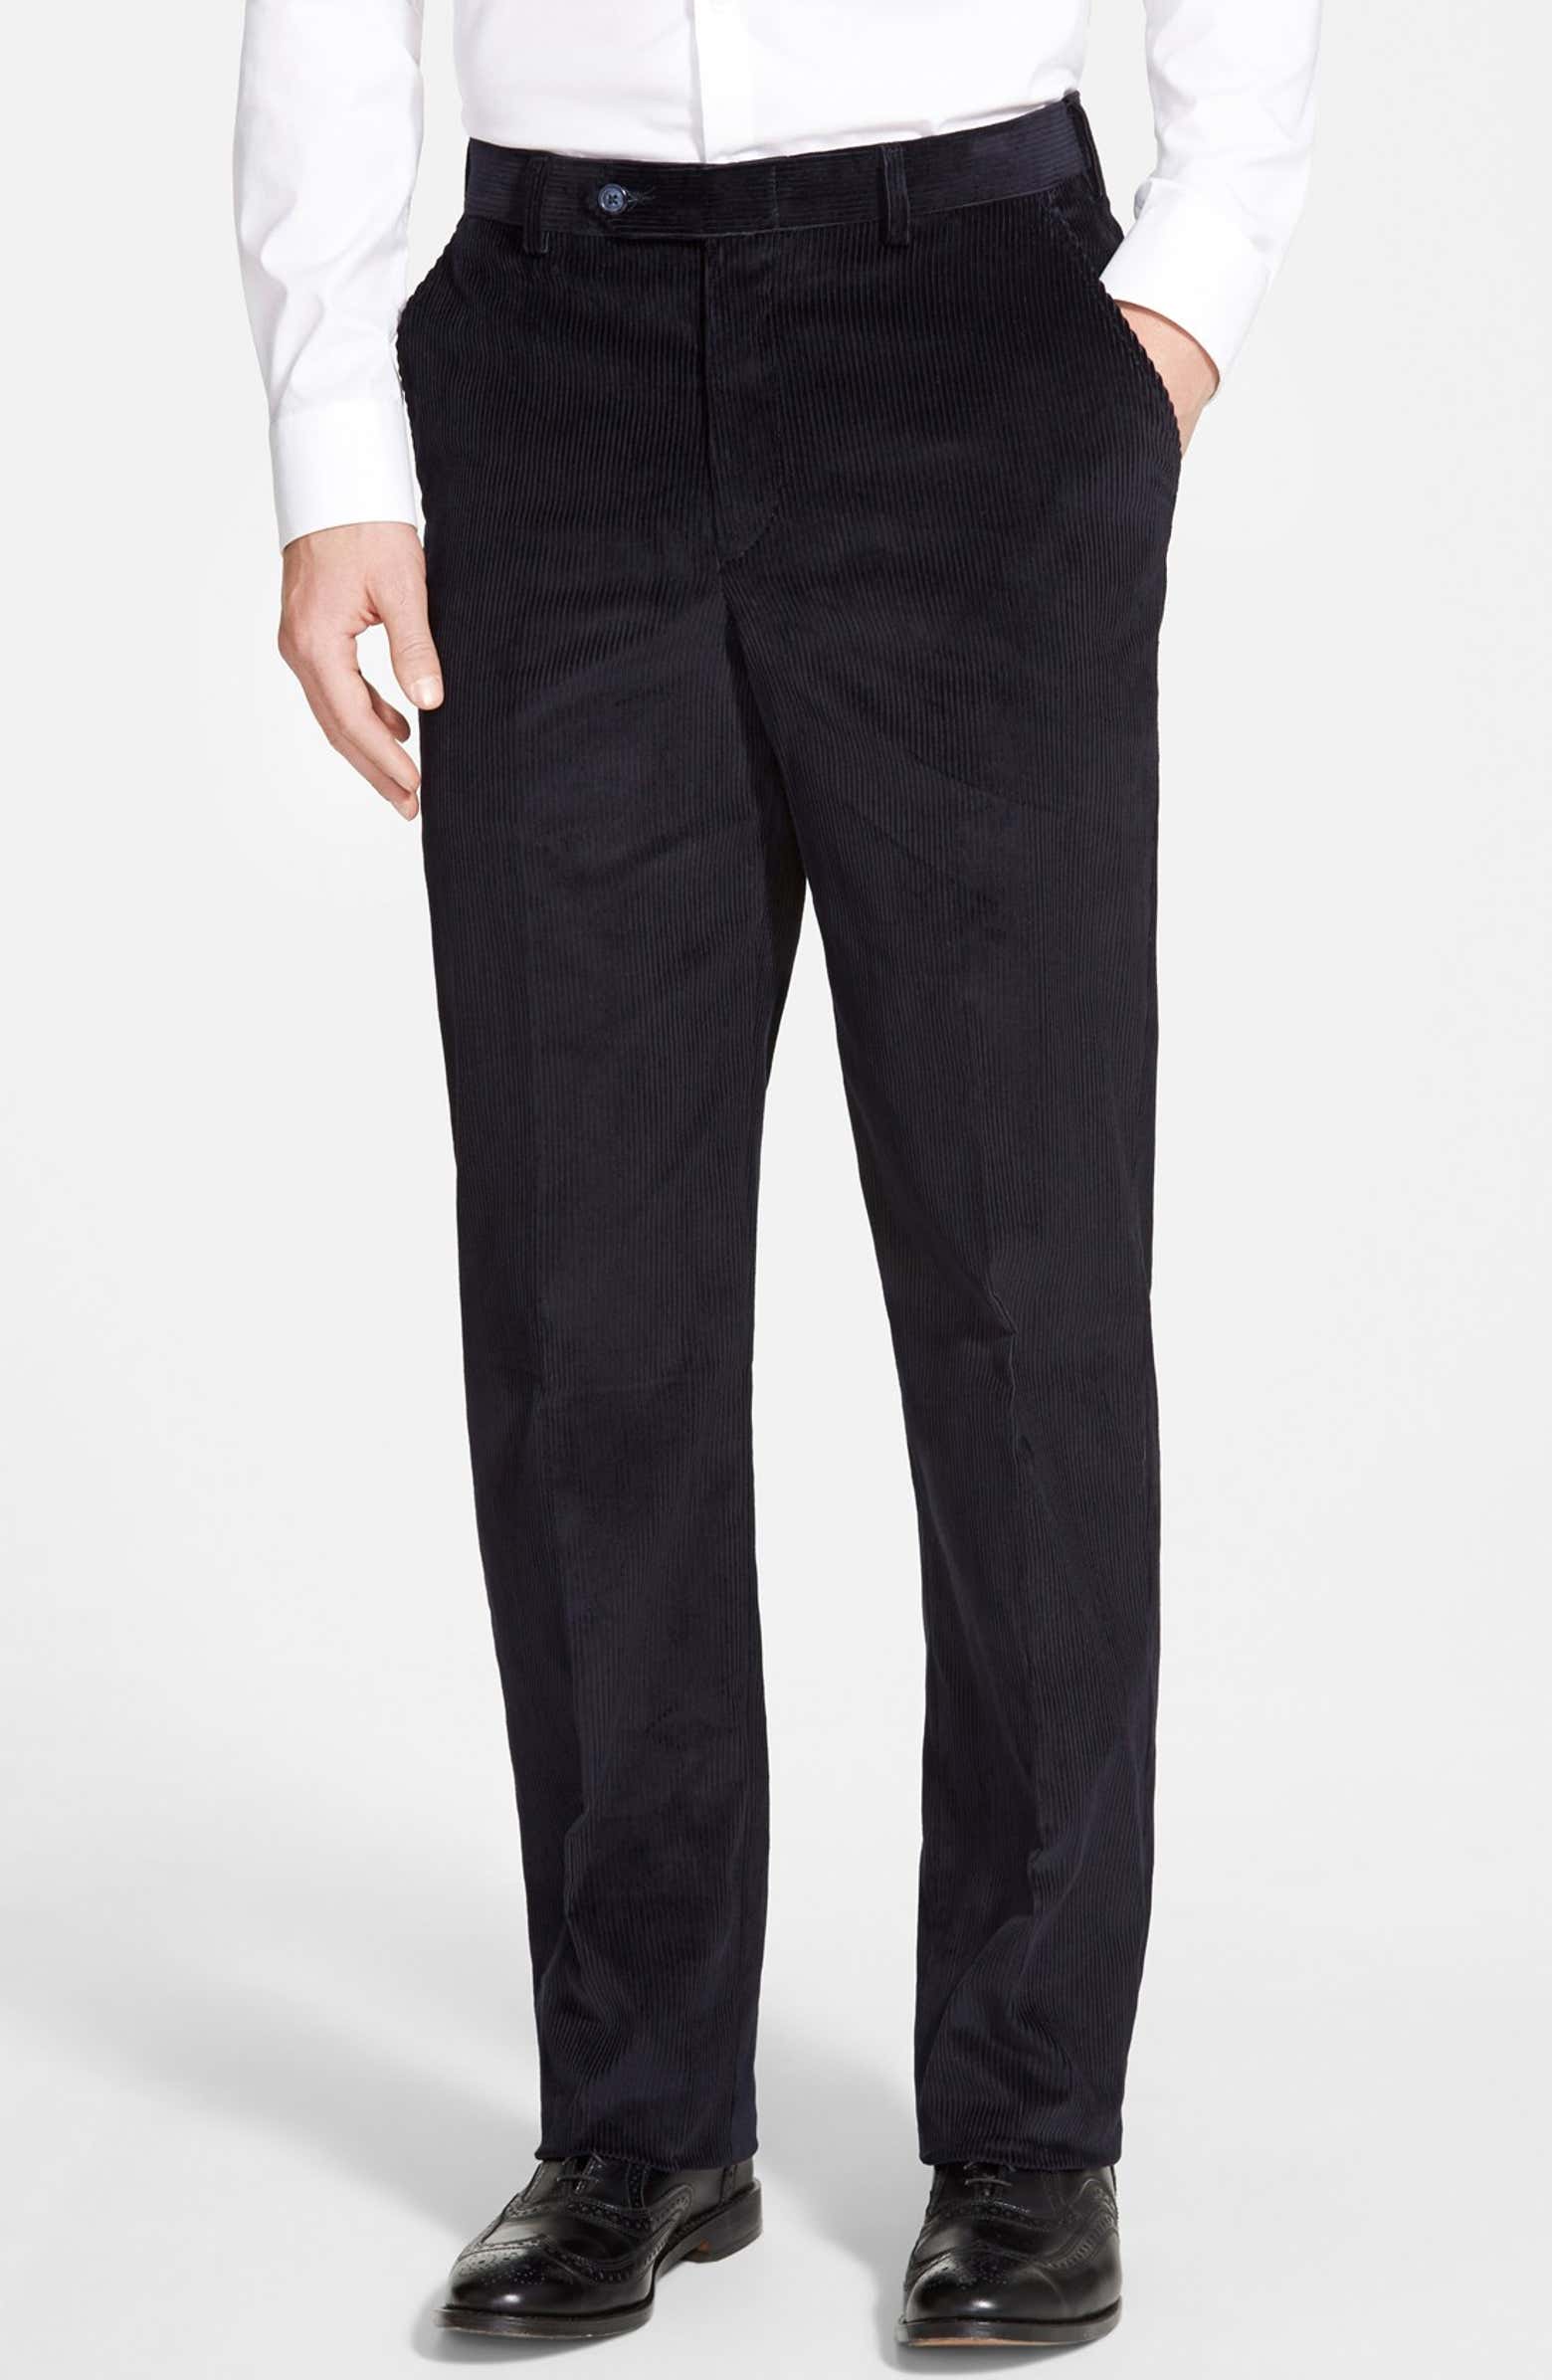 Berle Flat Front Corduroy Trousers | Nordstrom